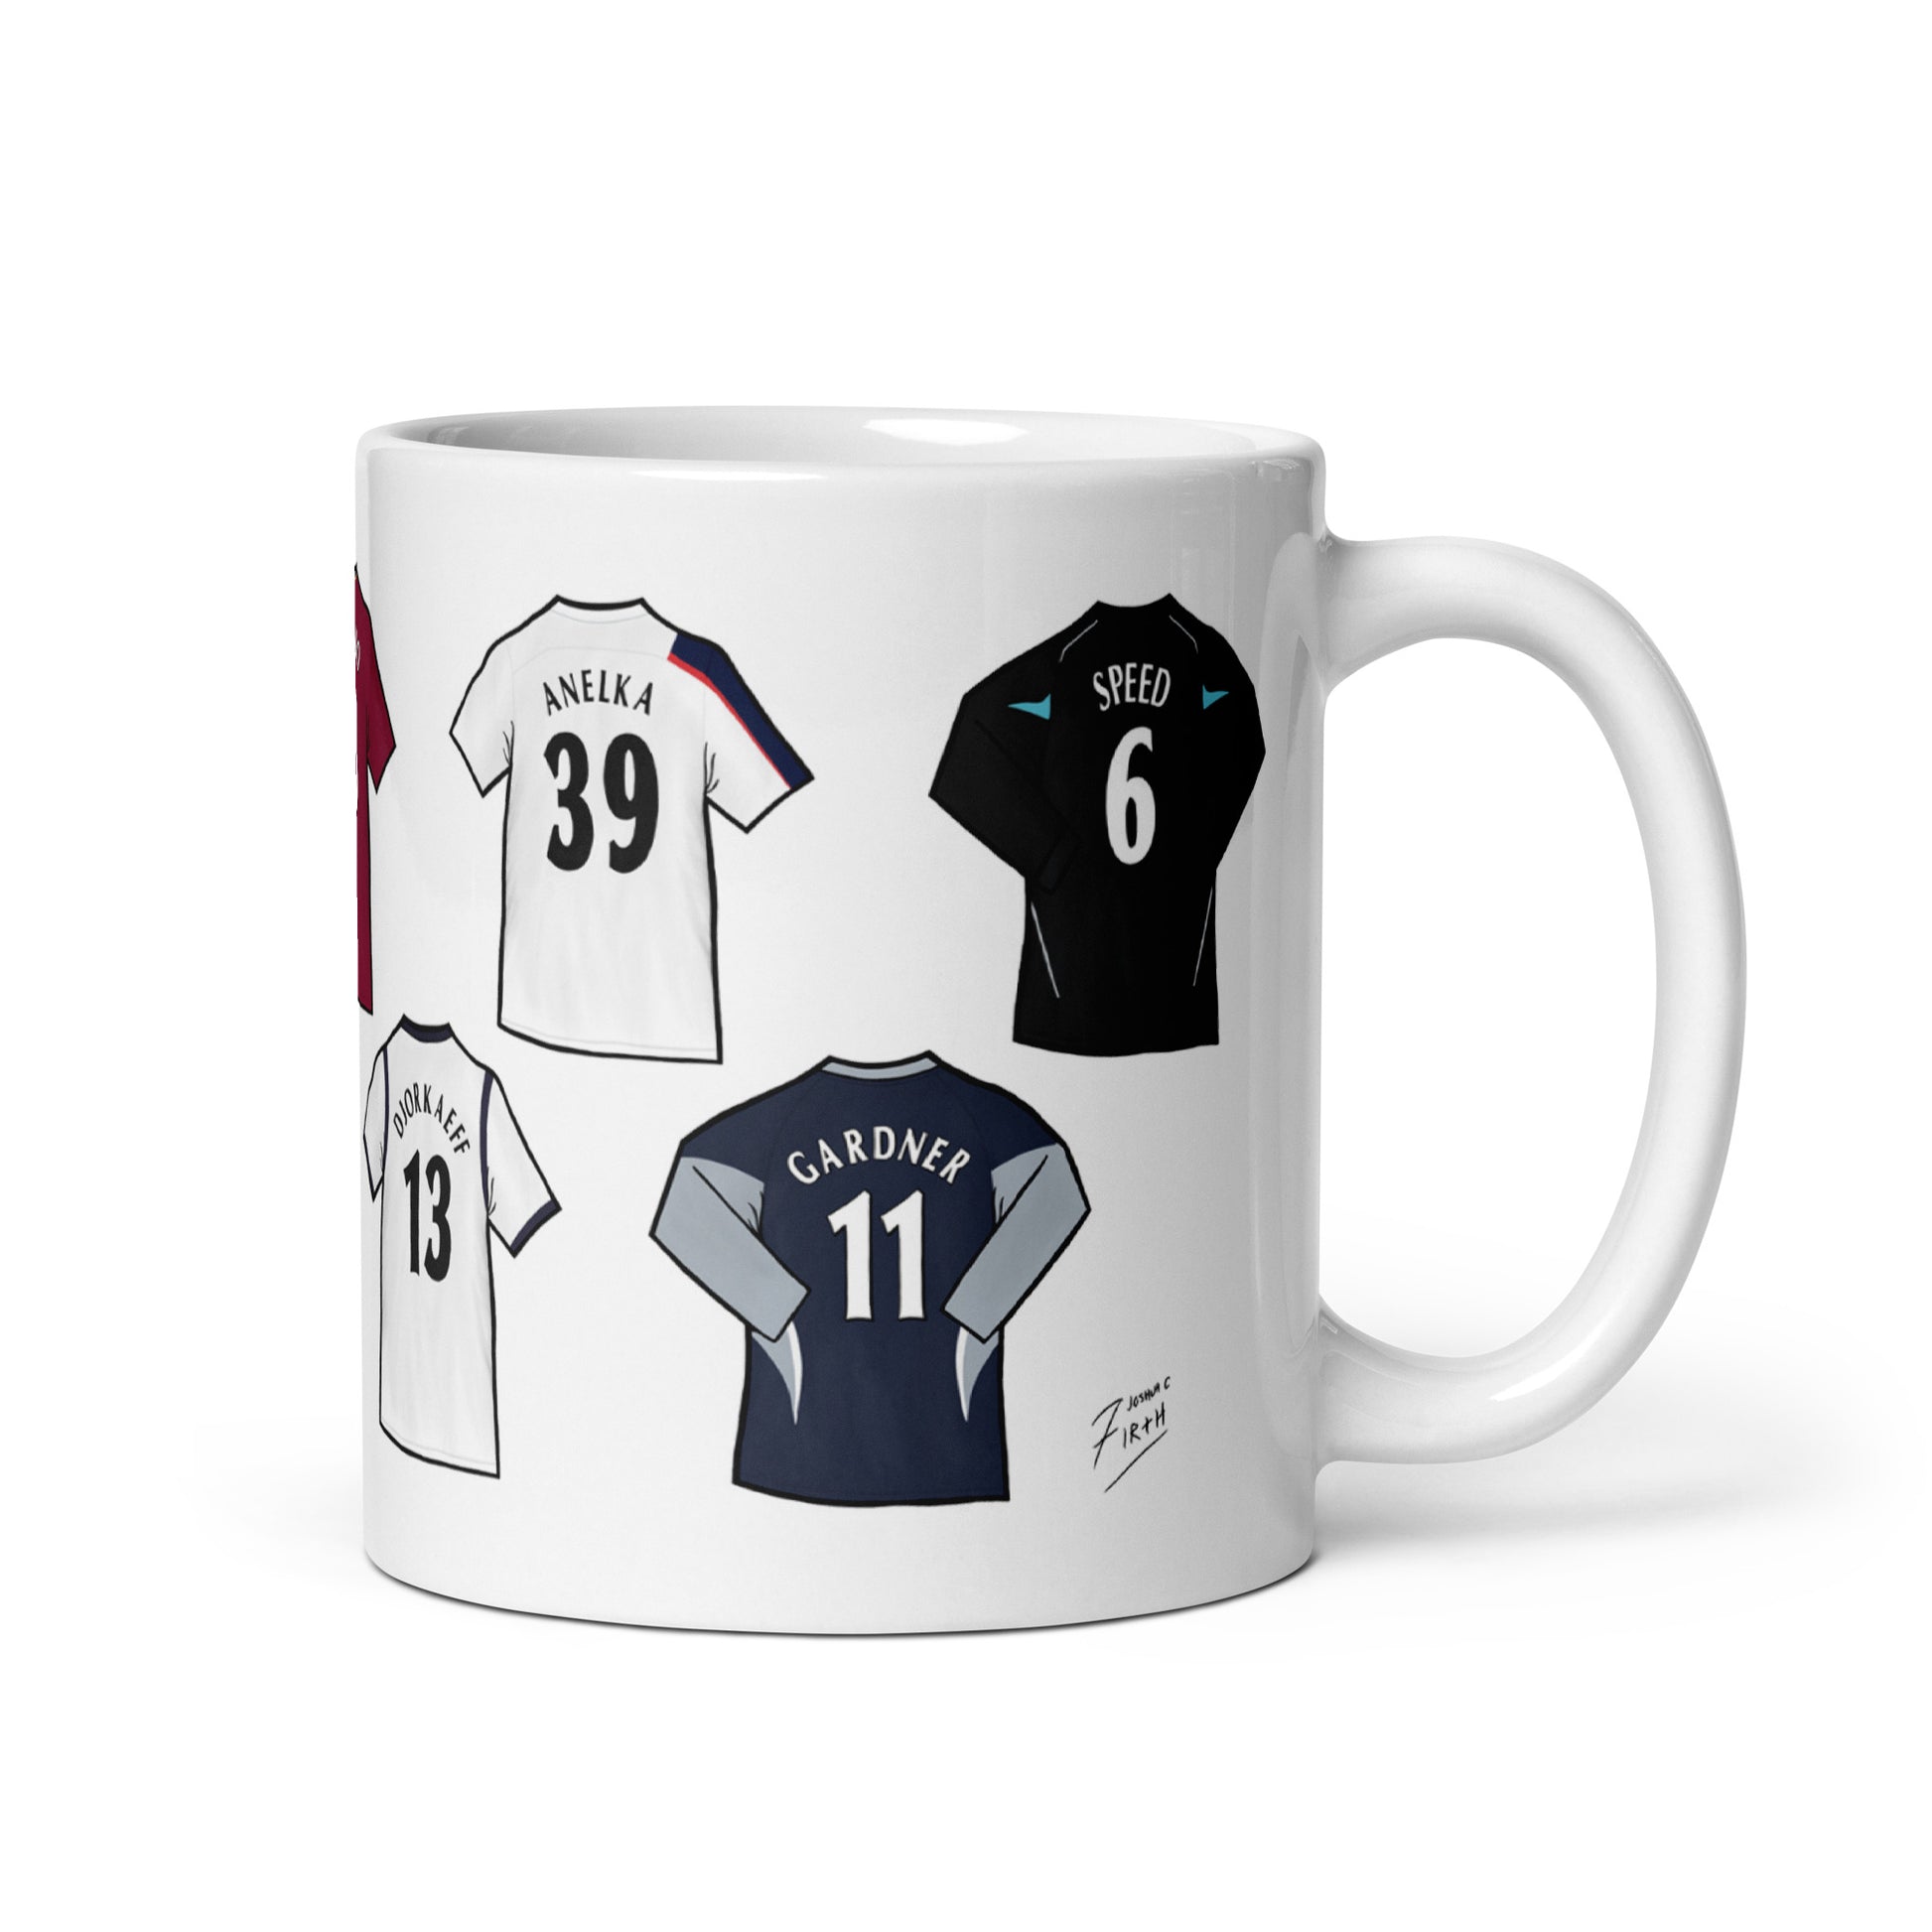 A mug inspired by the best players to play for Bolton. Legends of the Wanderers! Youri Djorkaeff, Nicholas Anelka, Gary Speed, Ricardo Gardner